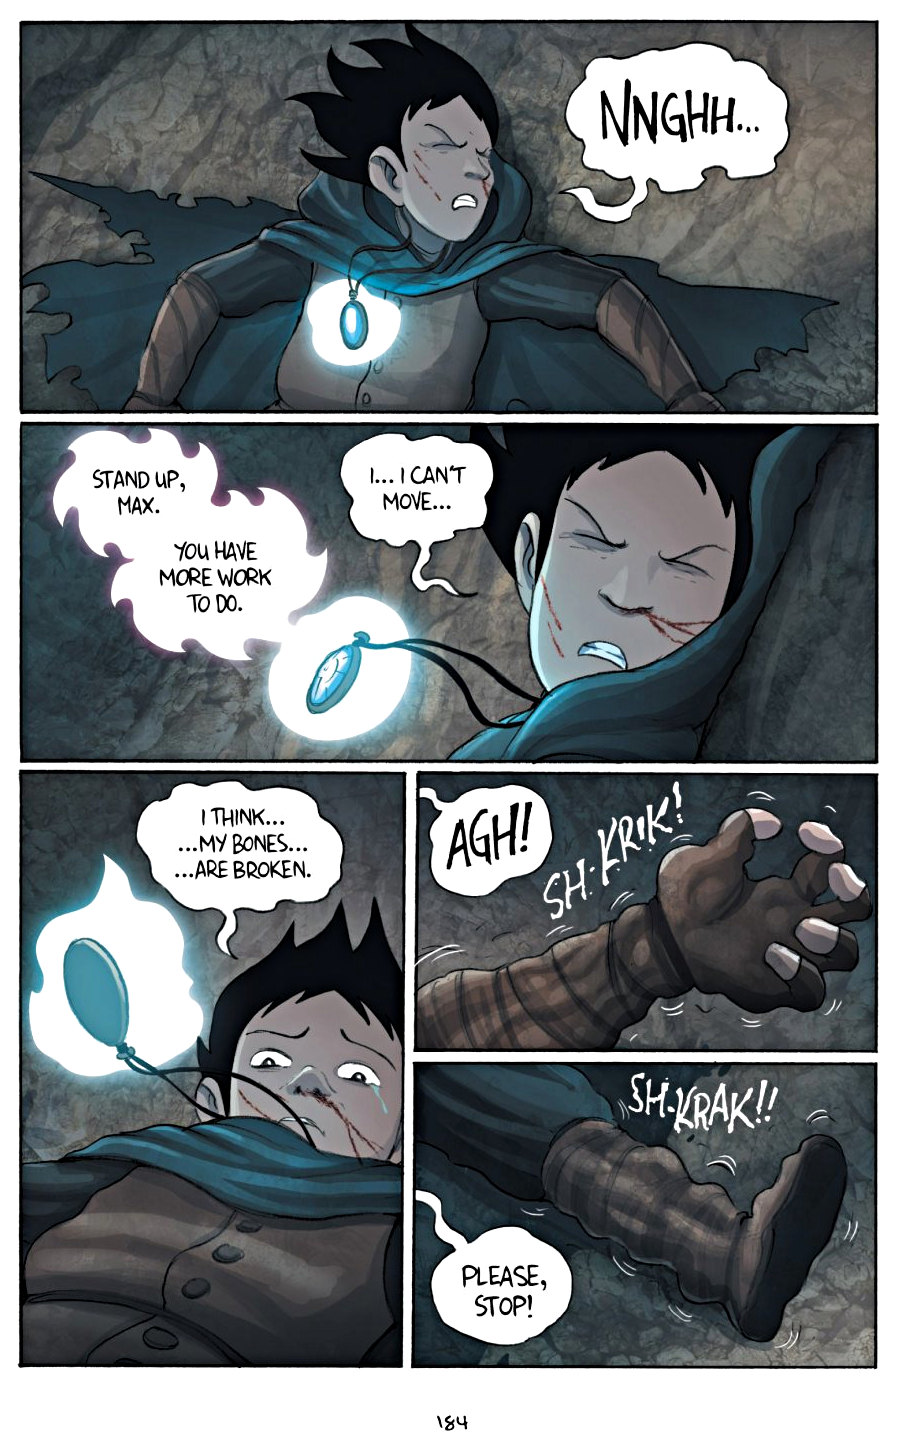 page 184 of amulet 5 prince of the elves graphic novel